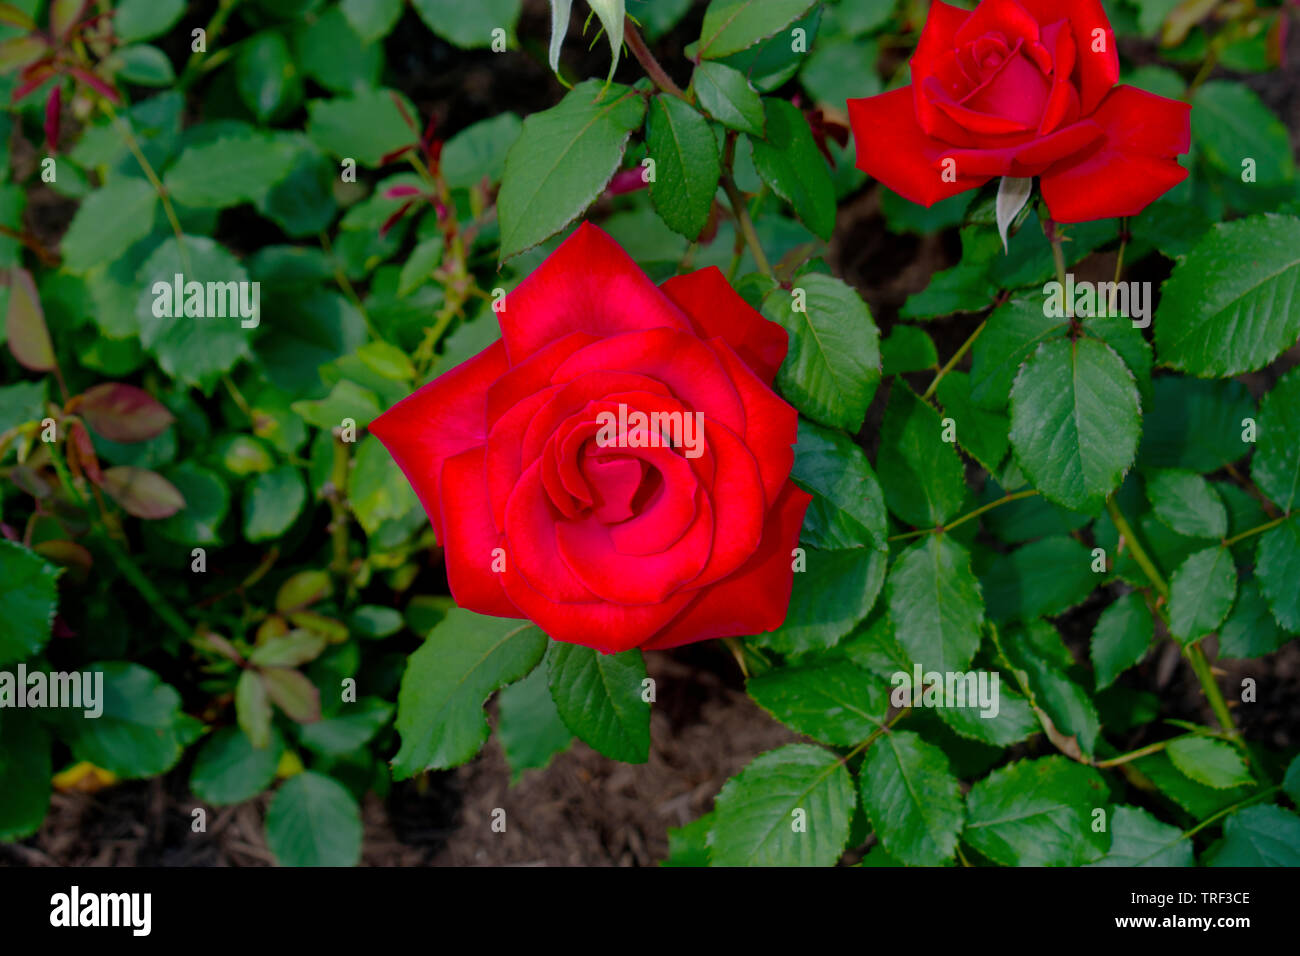 Two large red, roses surrounded by dark green leaves Stock Photo